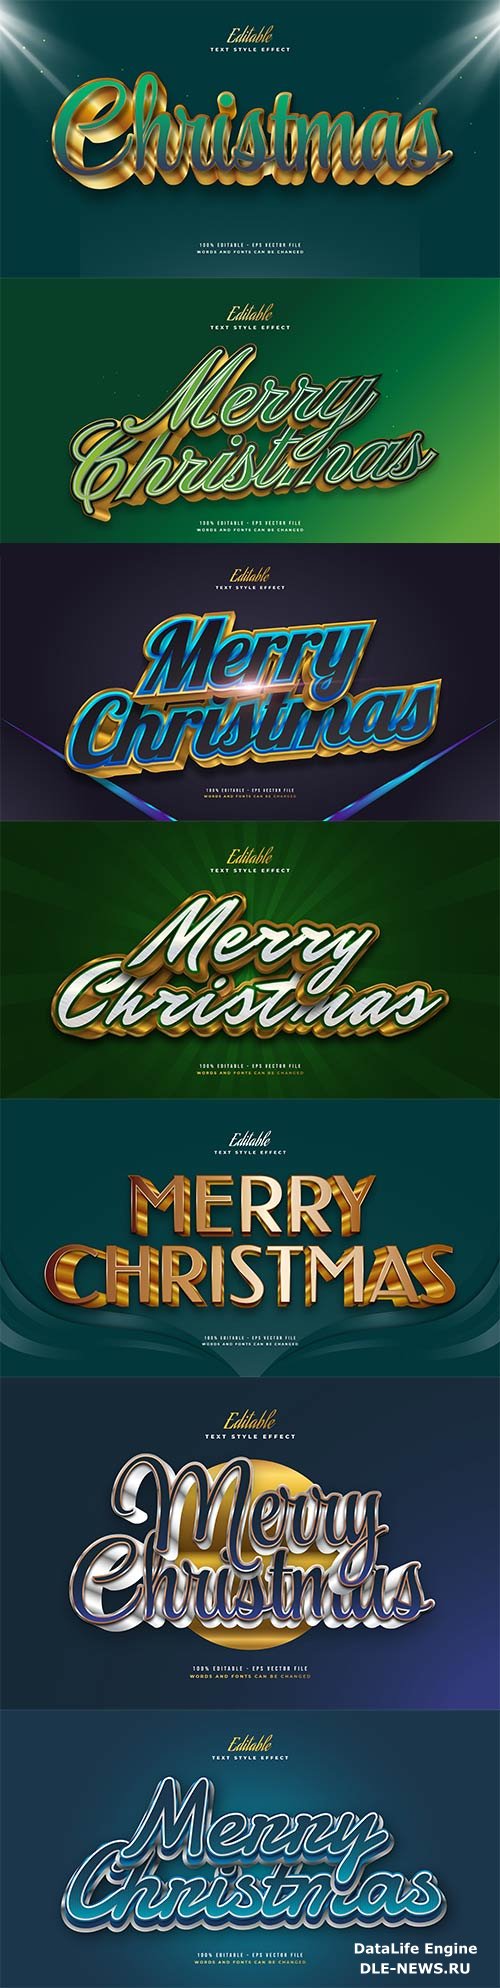 Merry christmas and happy new year 2022 editable vector text effects vol 23